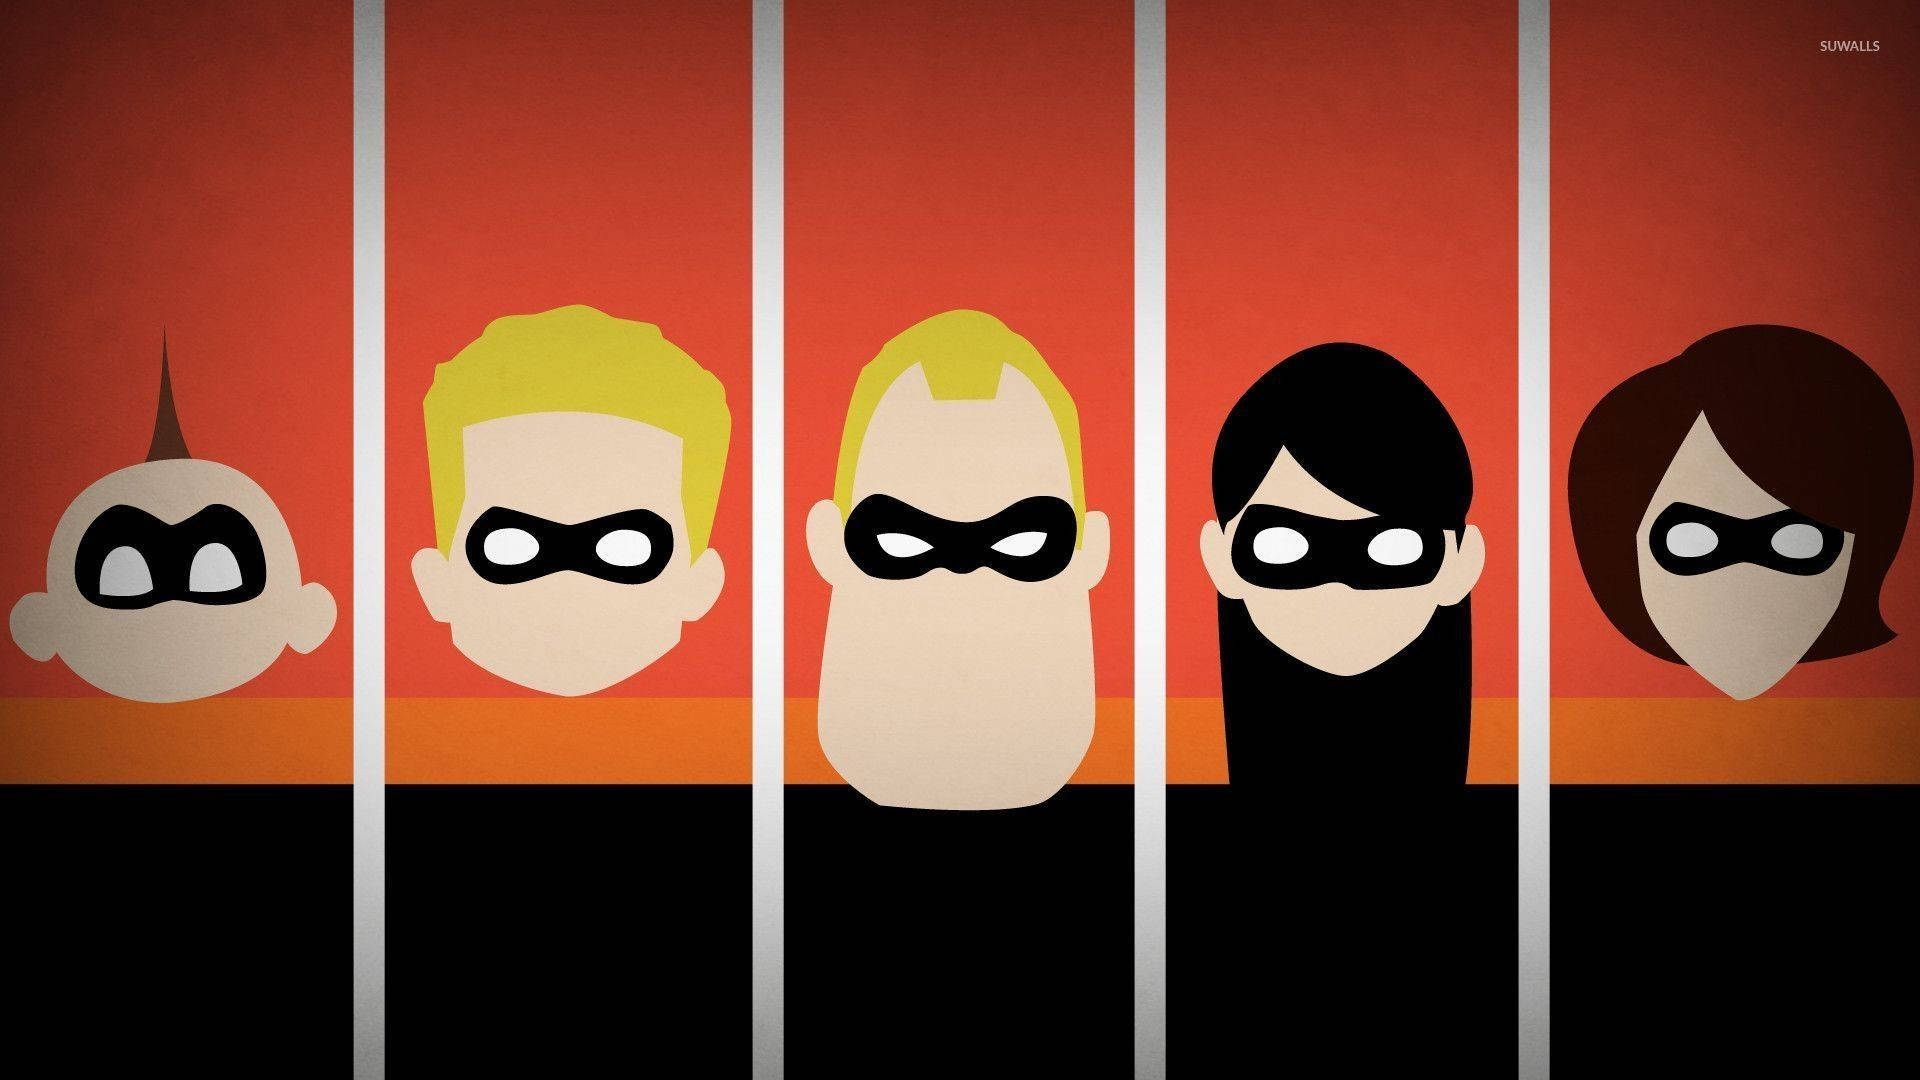 The Incredibles family ready for a mission Wallpaper